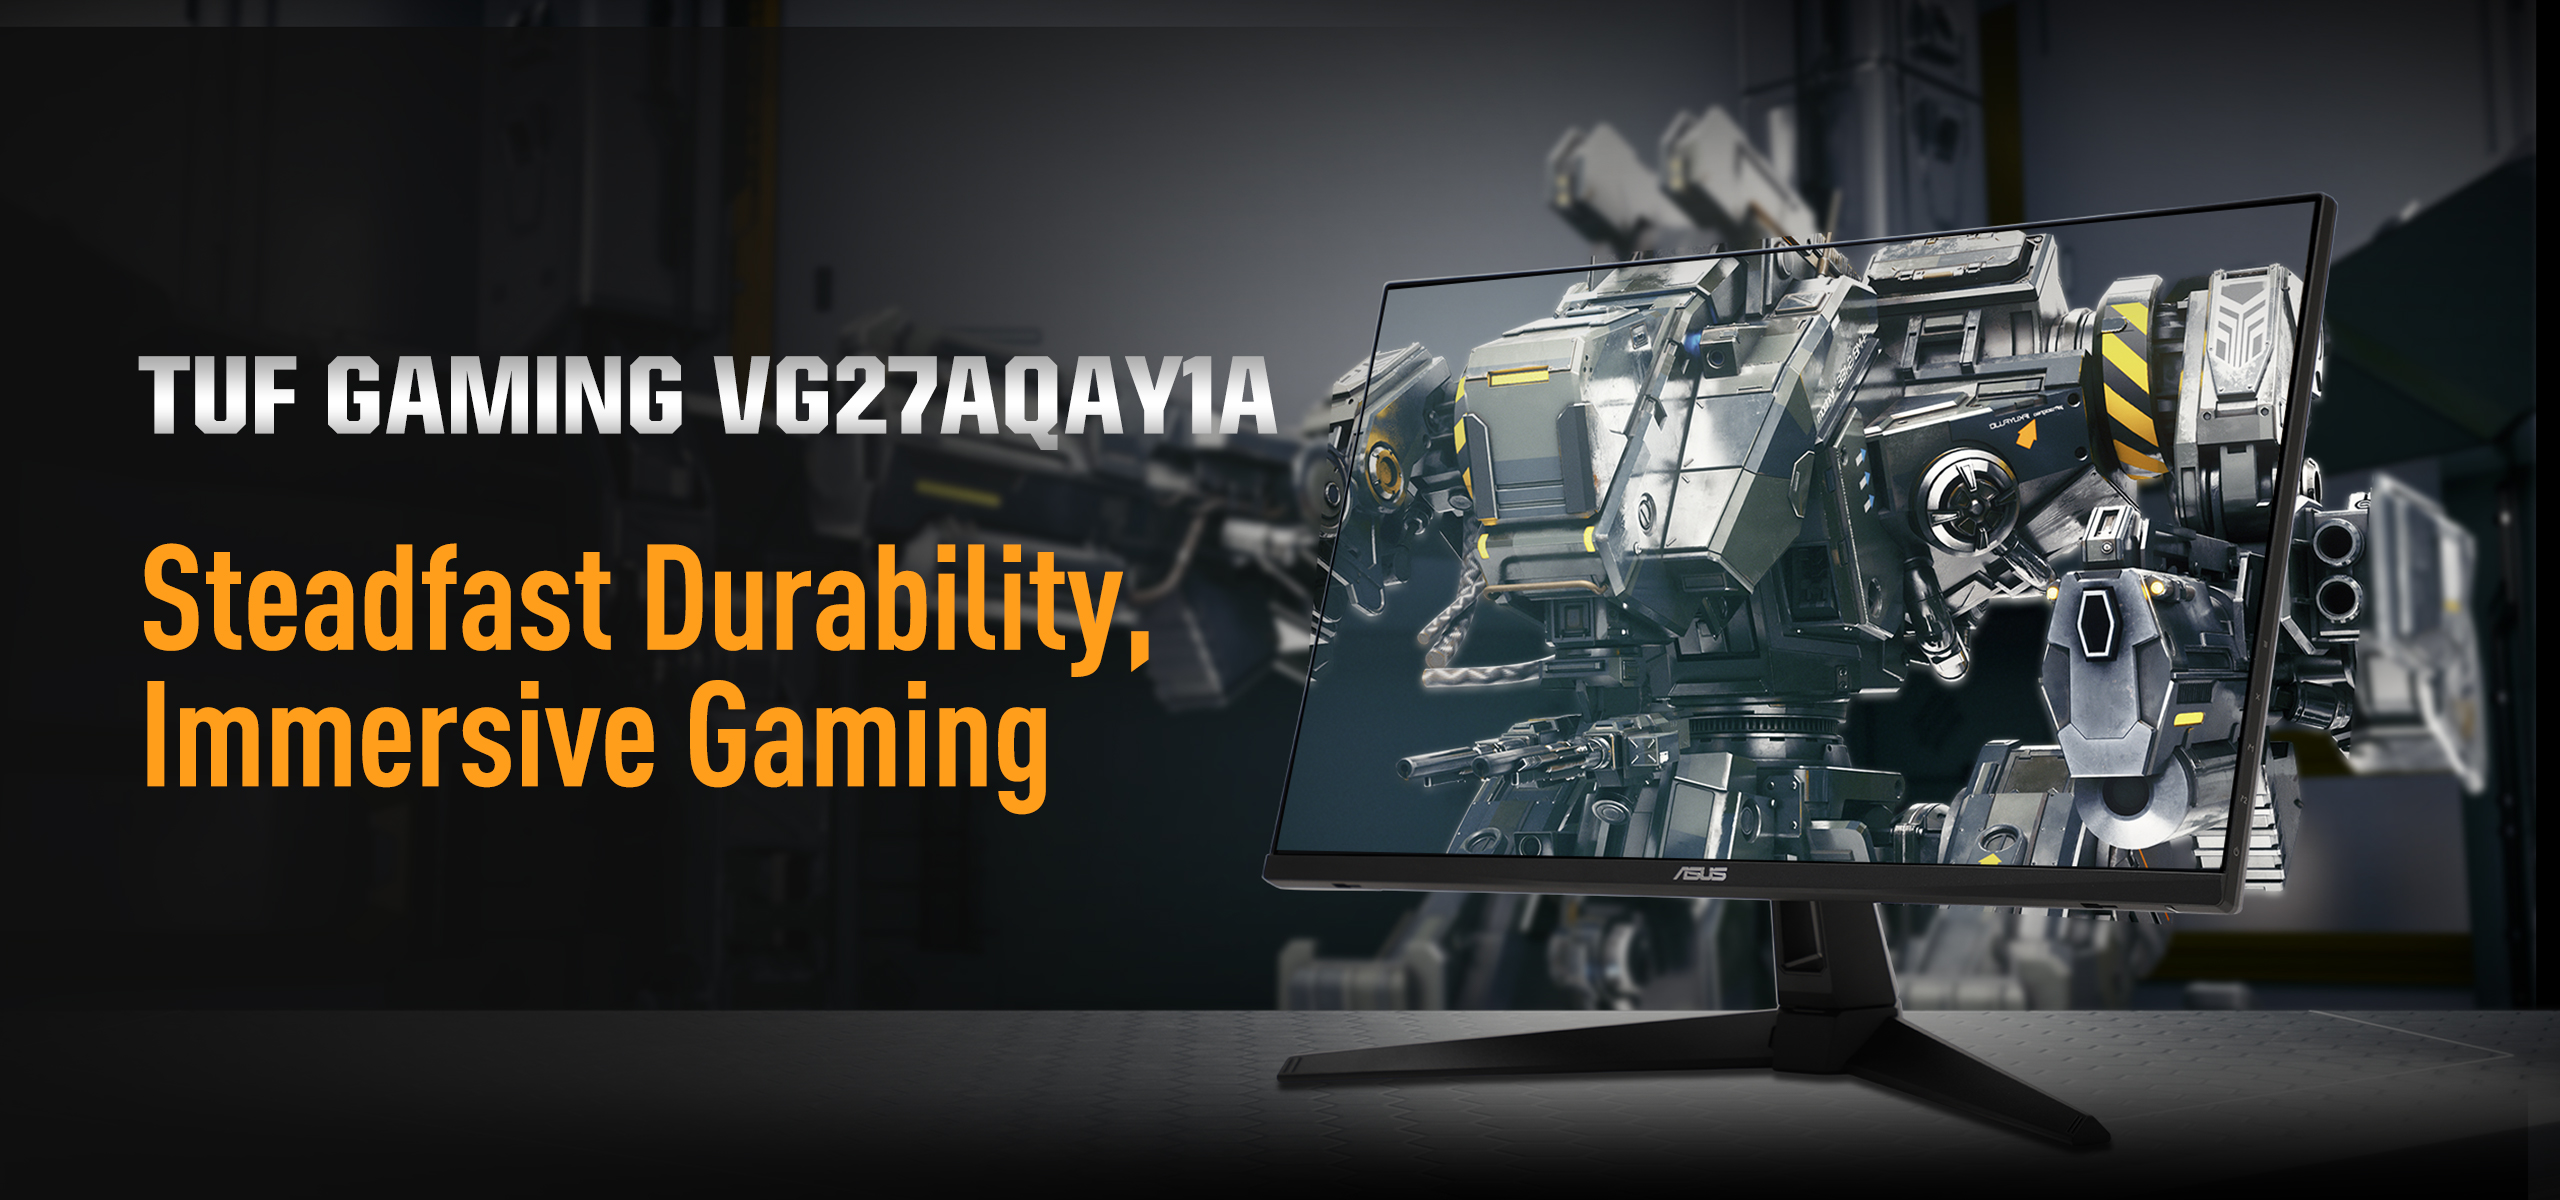 Key selling features of VG27AQAY1A